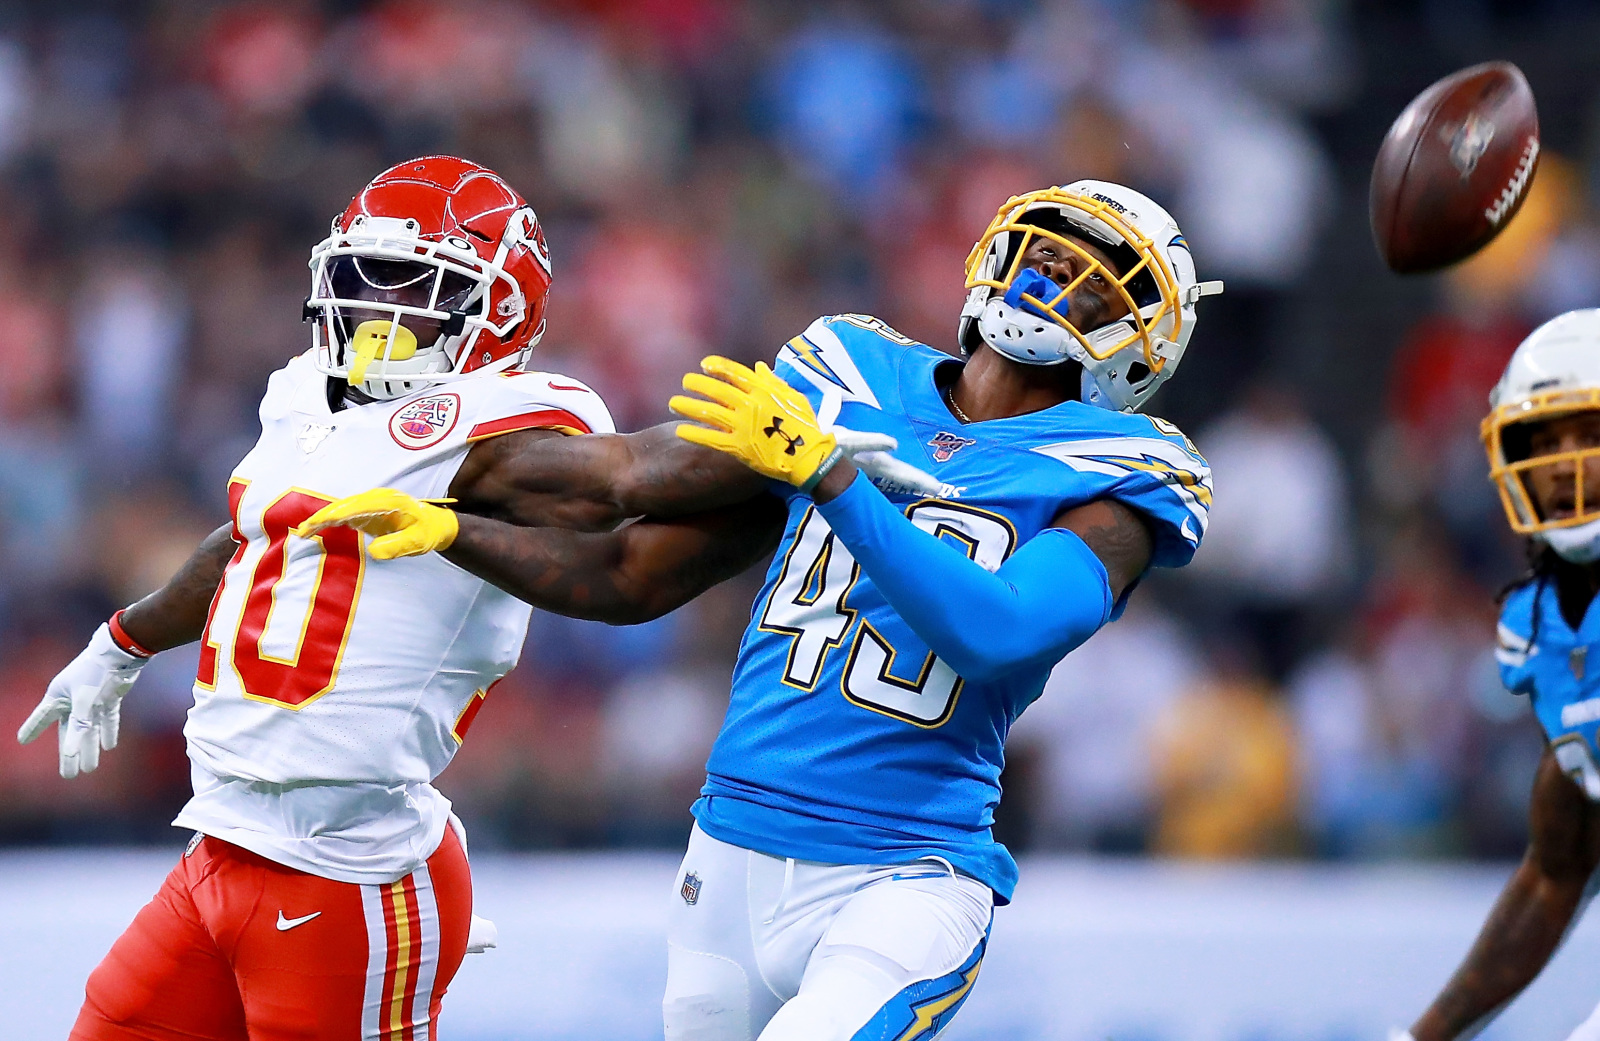 Chiefs can't stay healthy ever, Tyreek Hill hurts hamstring